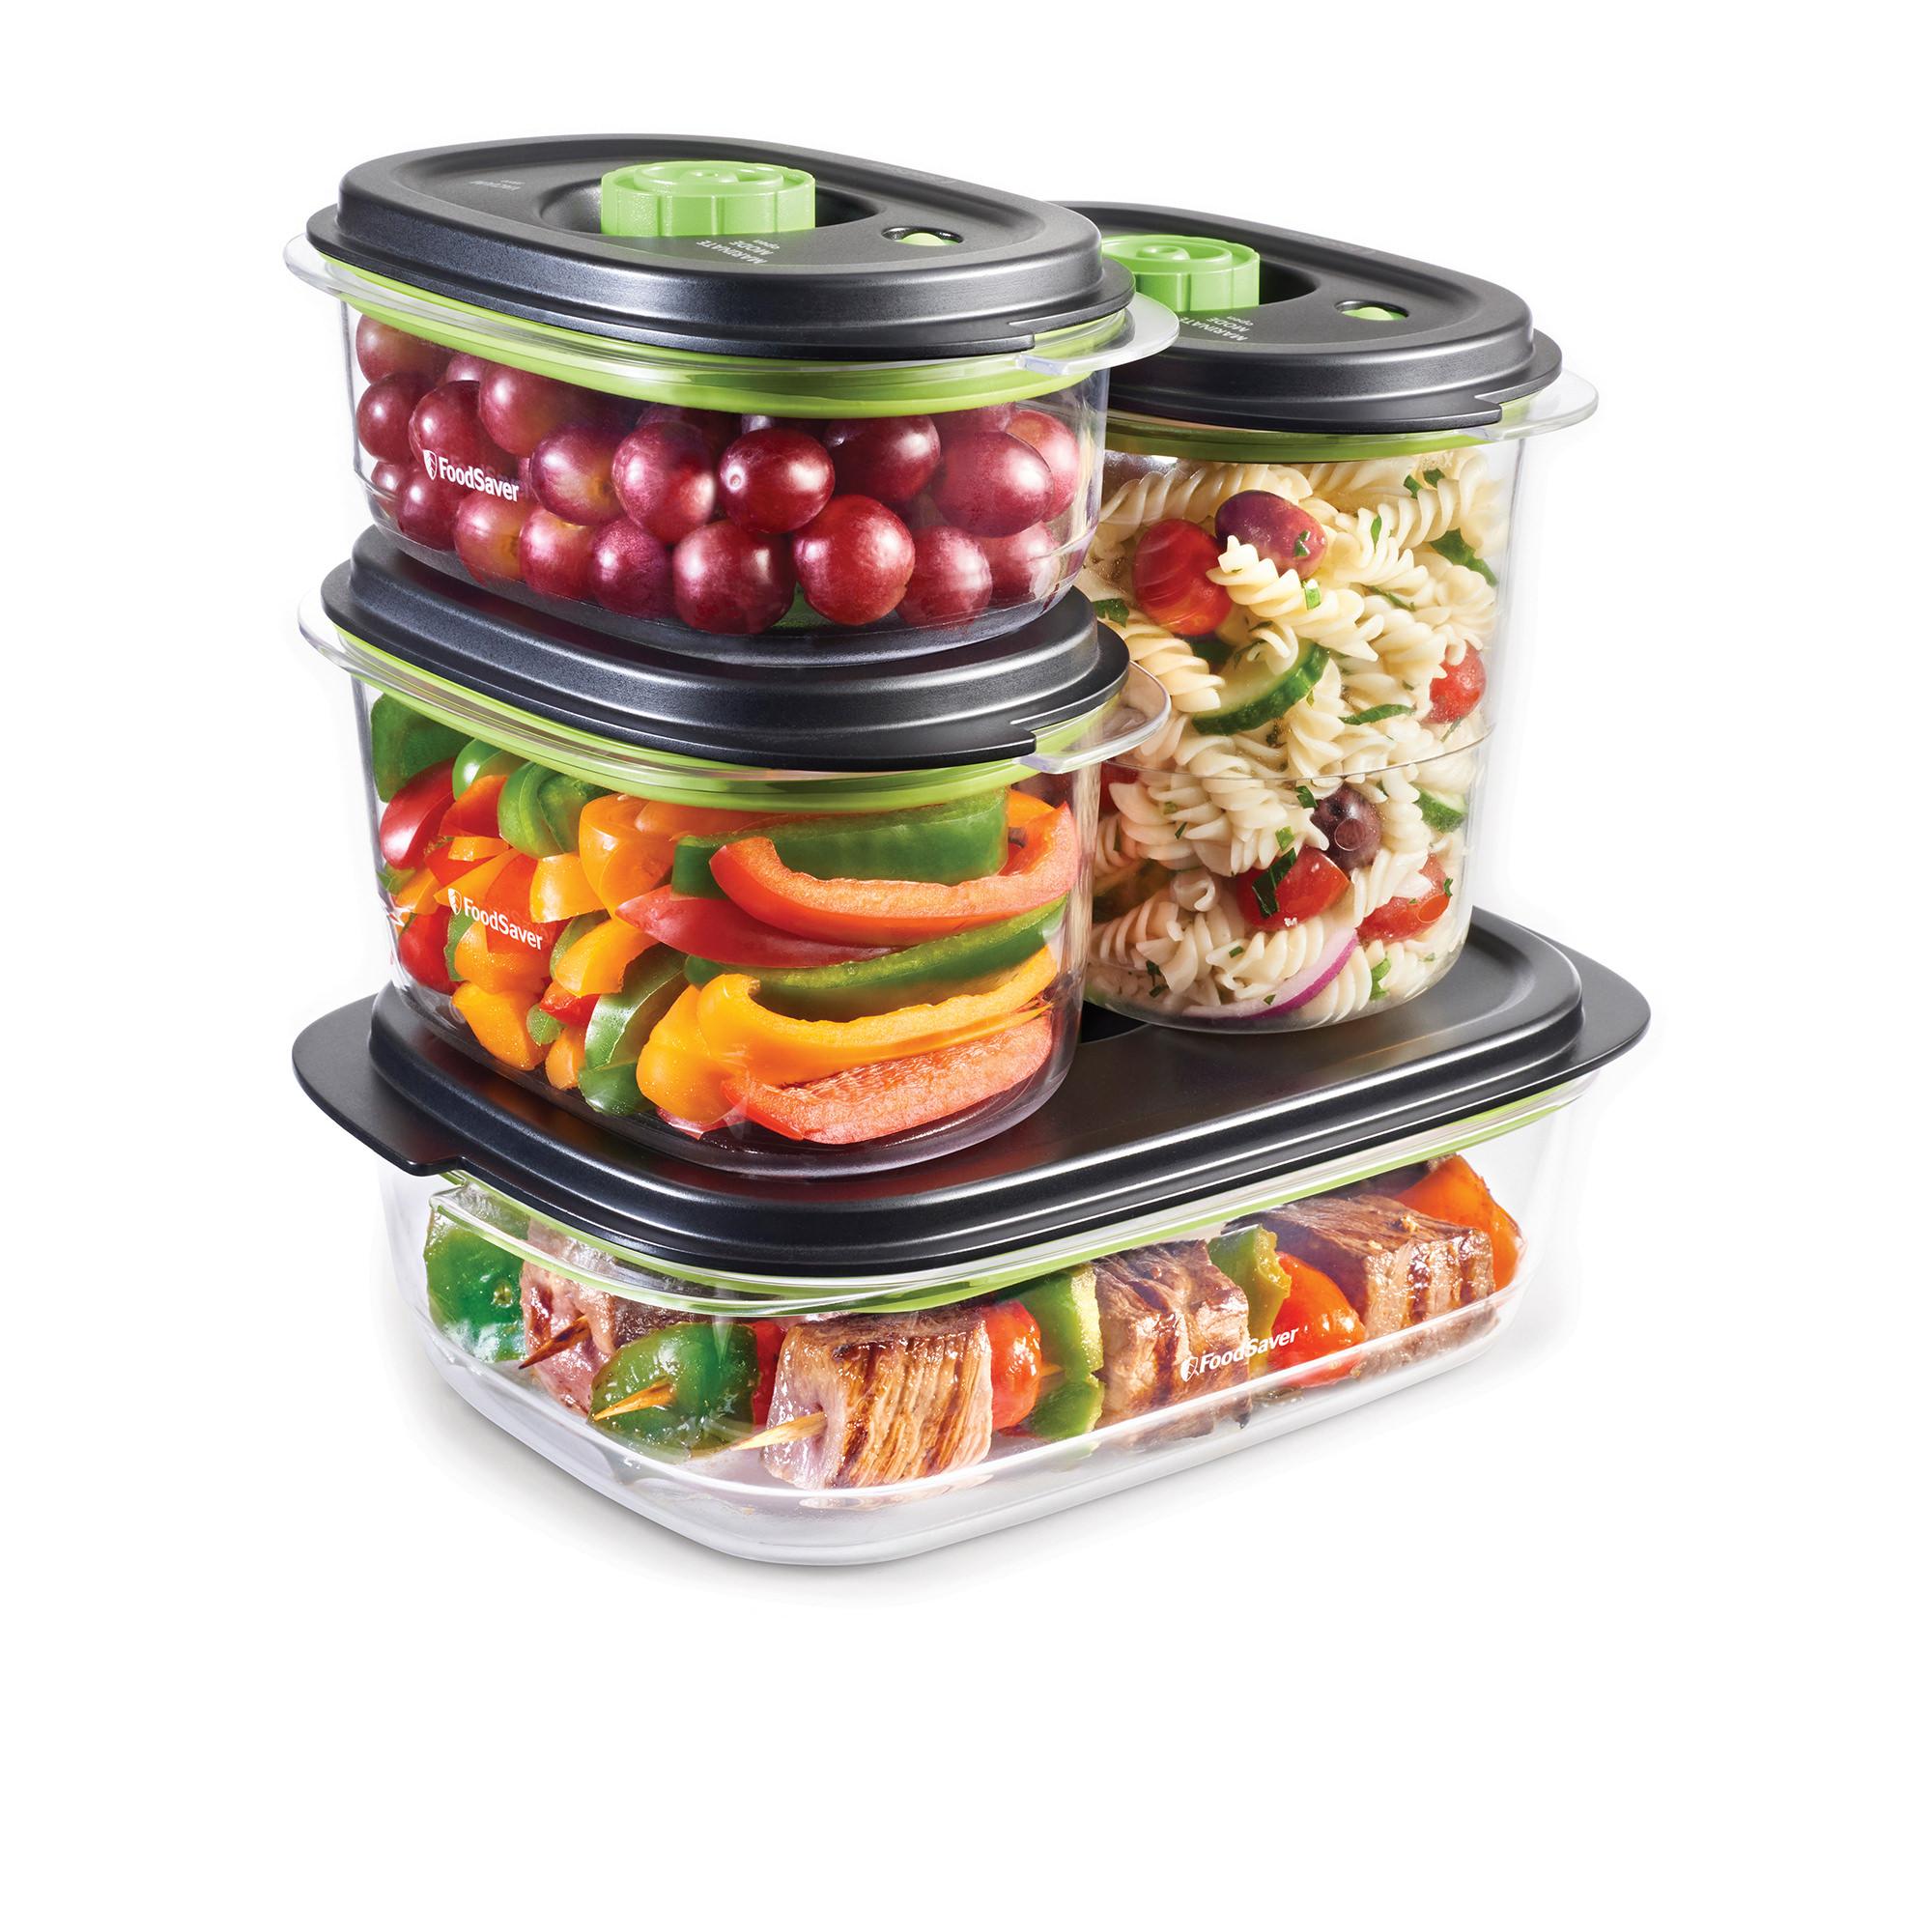 FoodSaver Preserve & Marinate Container 10 Cup Black Image 3